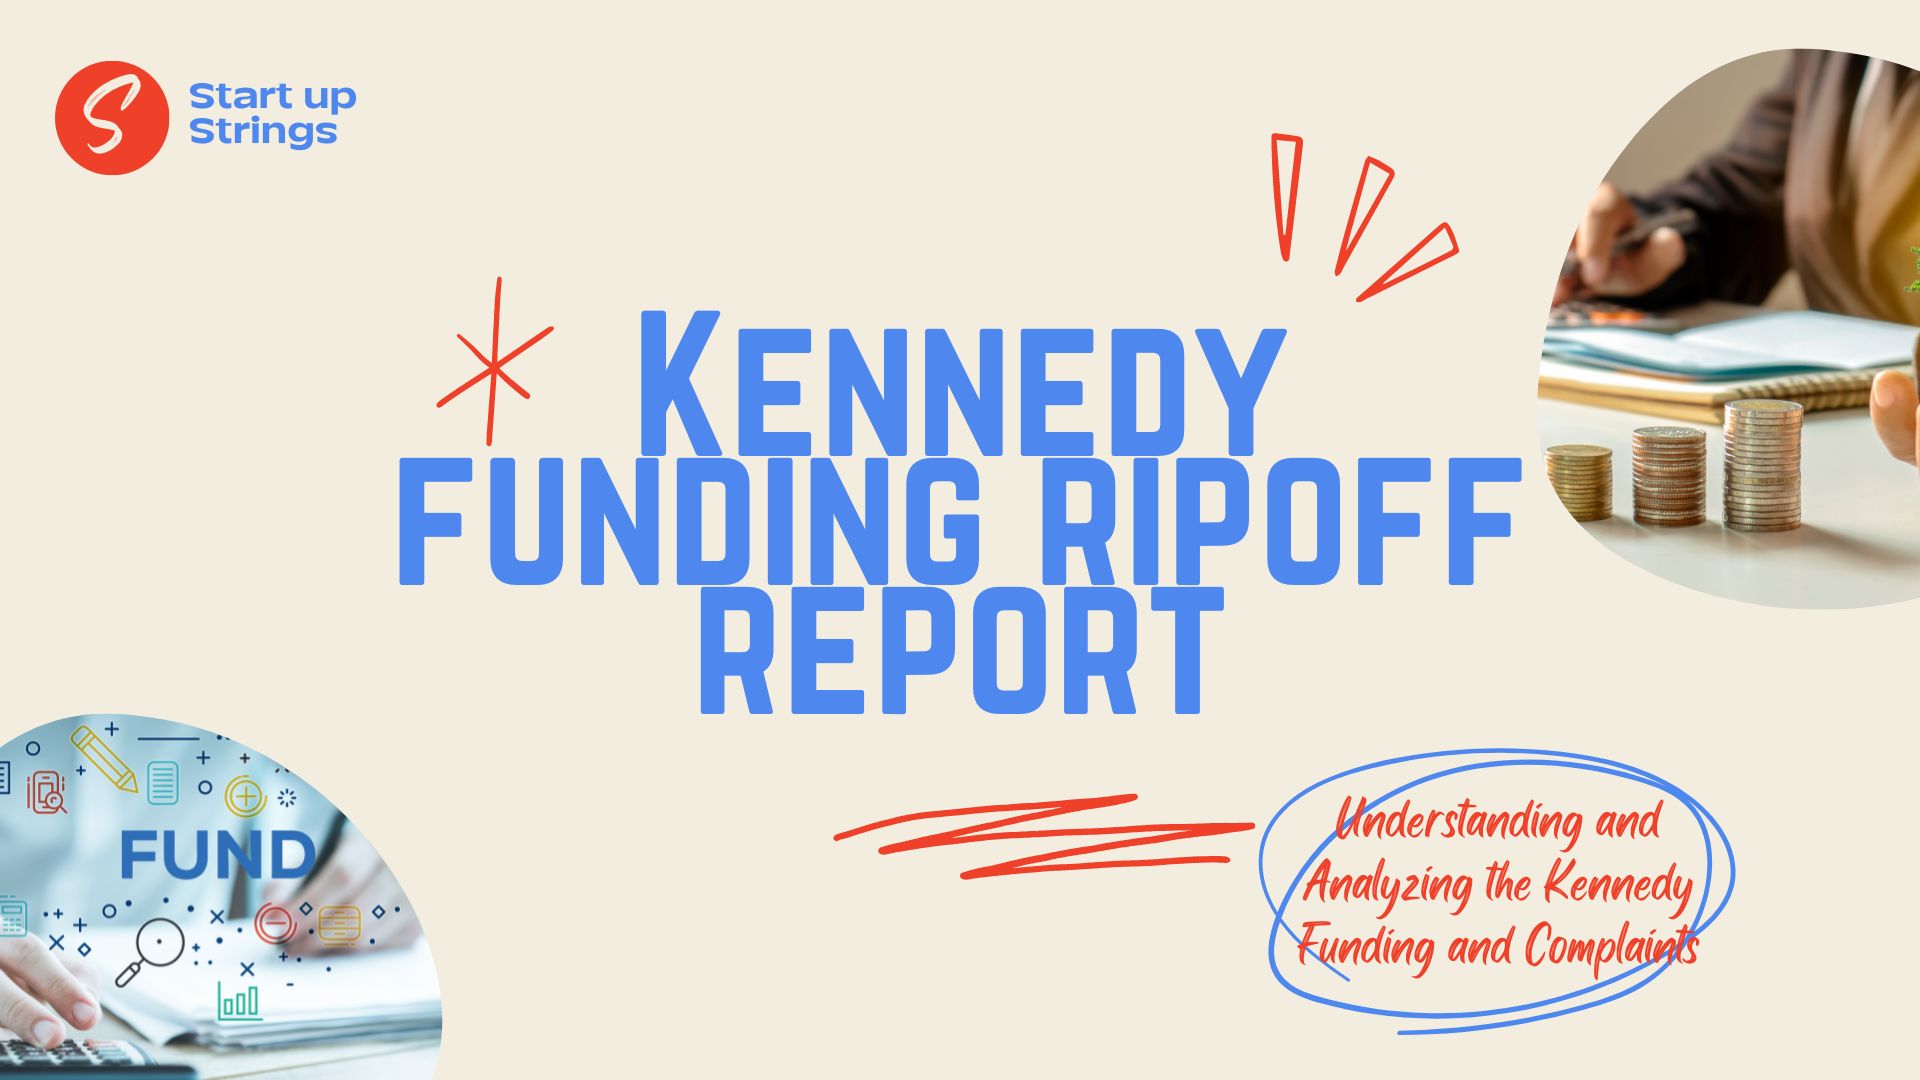 kennedy Funding ripoff report | Startup Strings